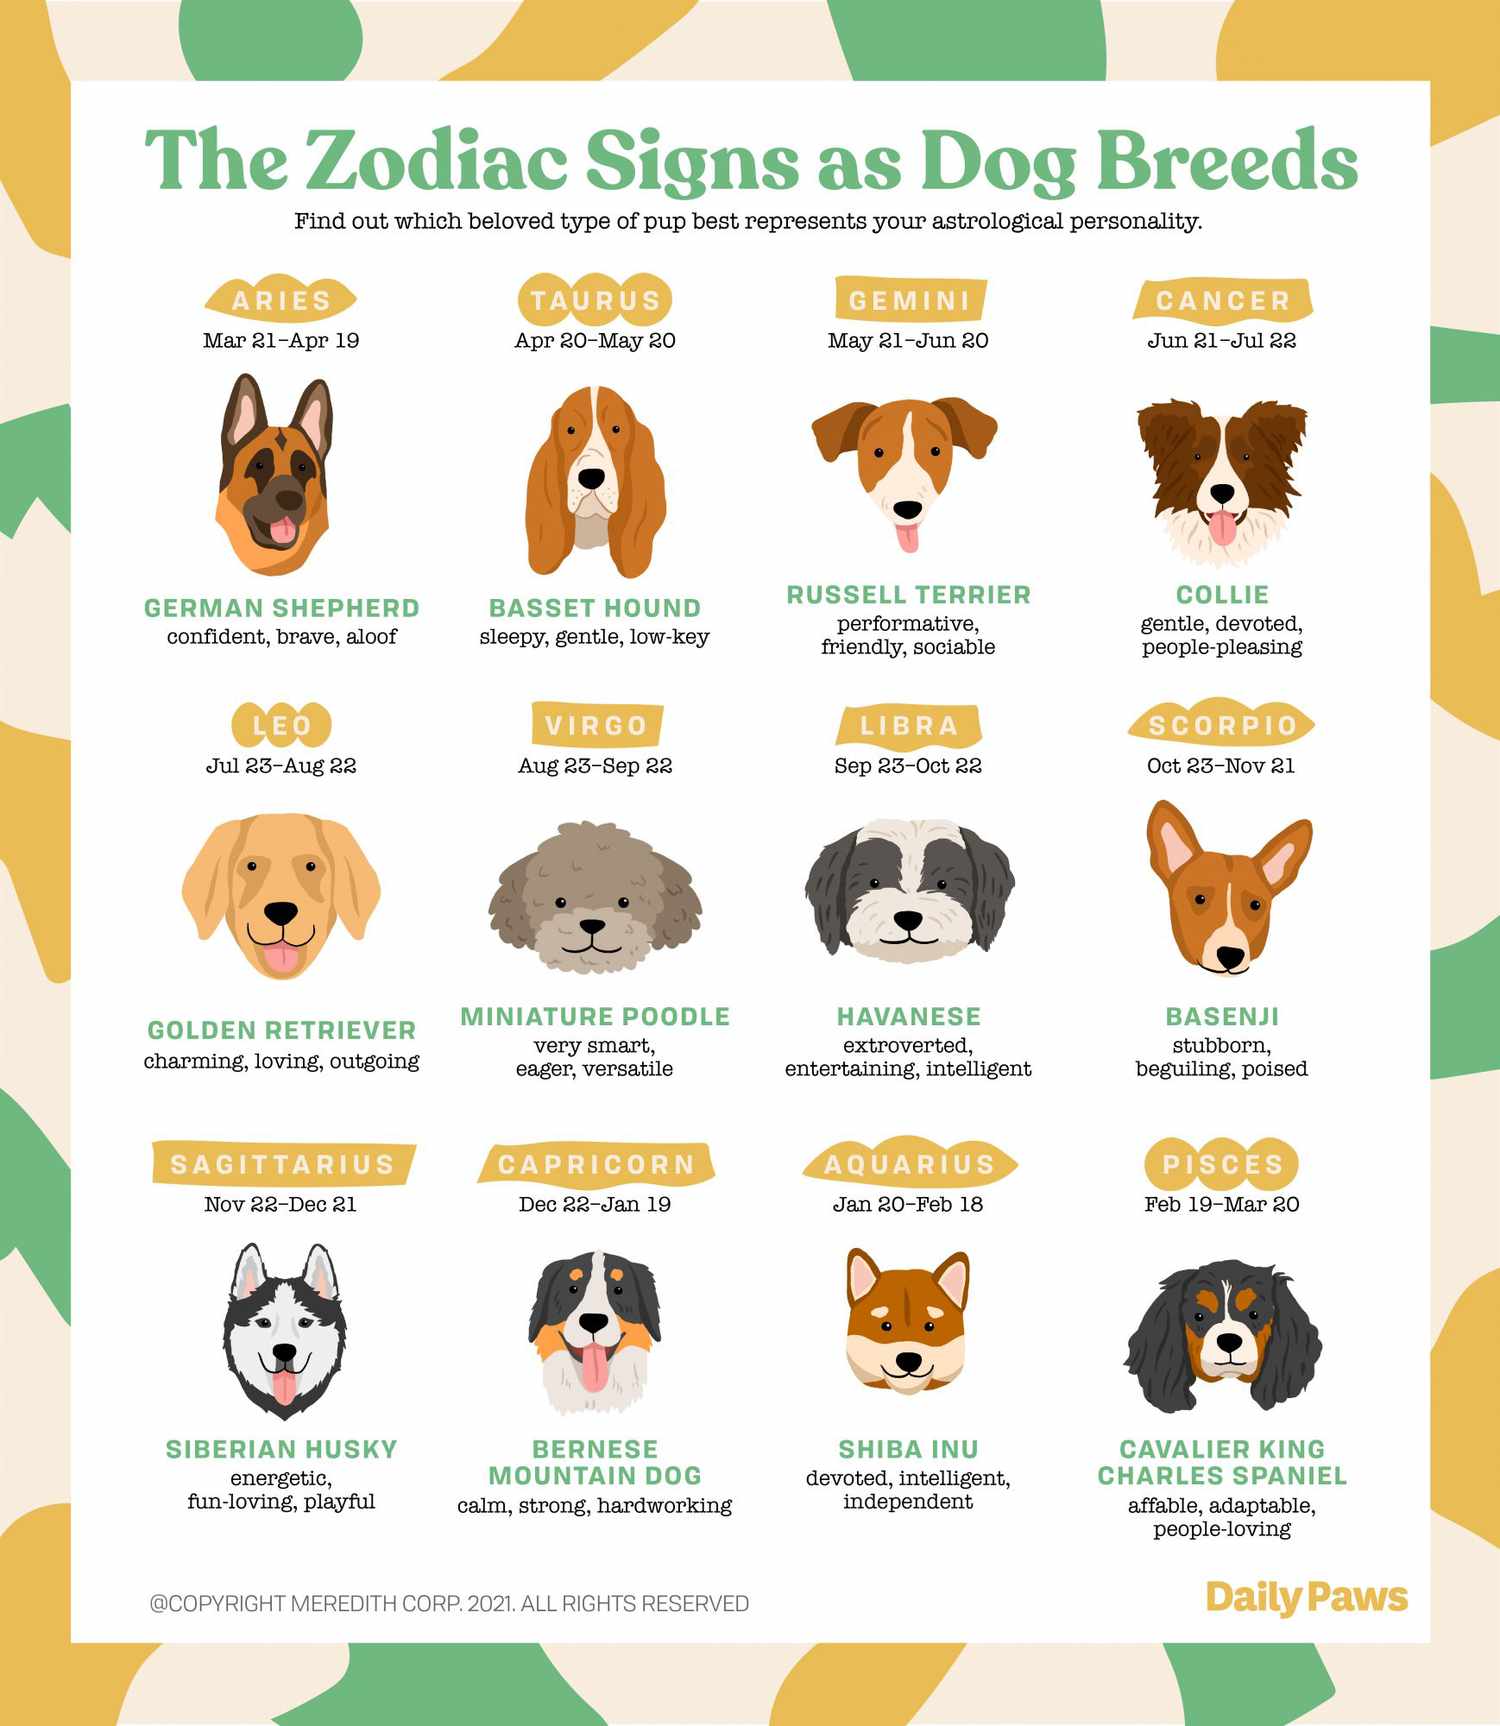 Which Dog Breed Would You Be Based on Your Zodiac Sign? | Daily Paws